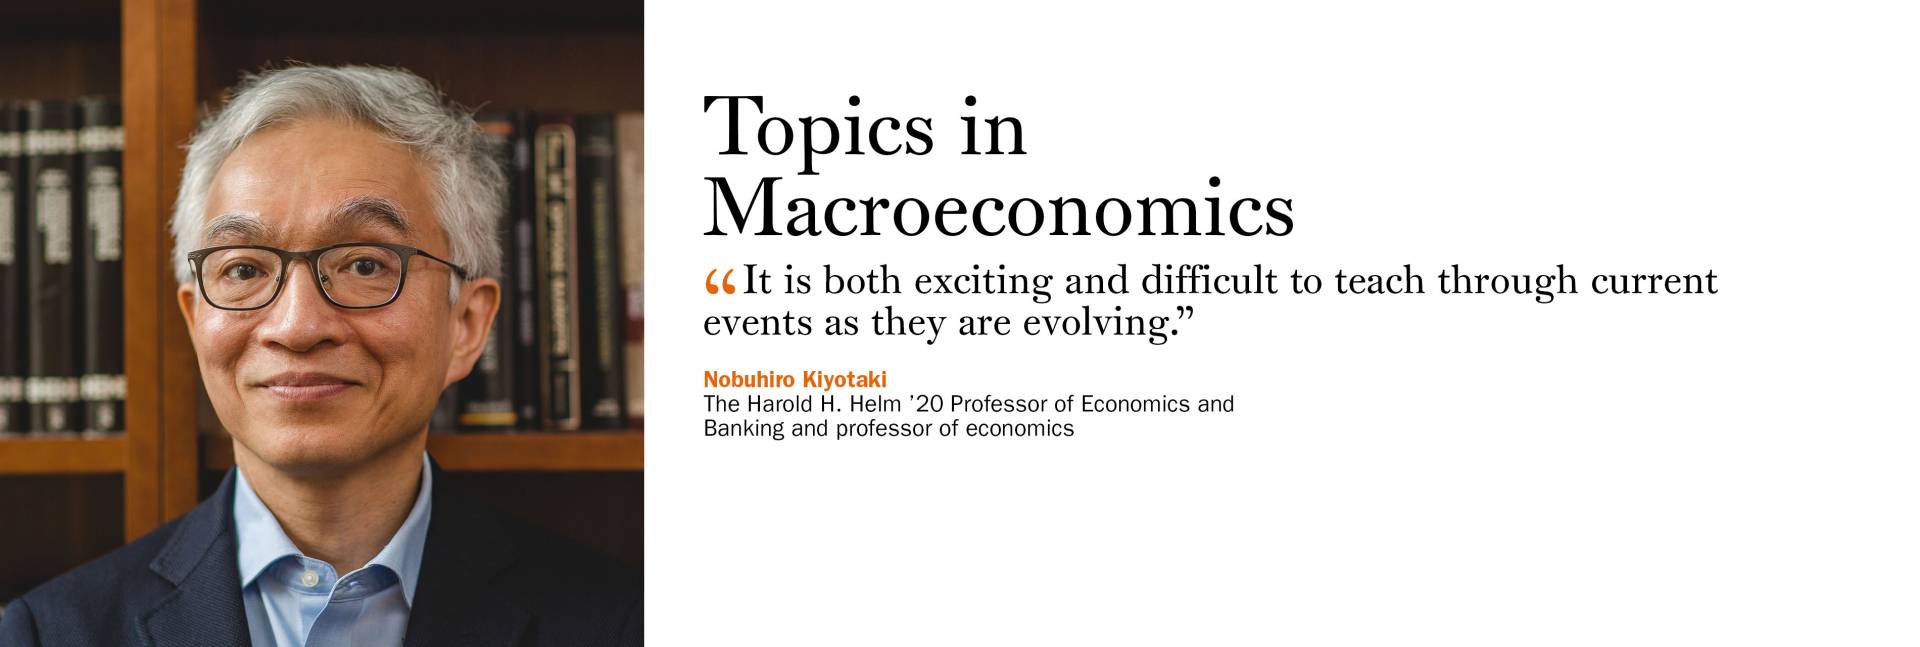 Topics in Macroeconomics. Nobuhiro Kiyotaki, the Harold H. Helm ’20 Professor of Economics and Banking and professor of economics. “It is both exciting and difficult to teach through current events as they are evolving.”